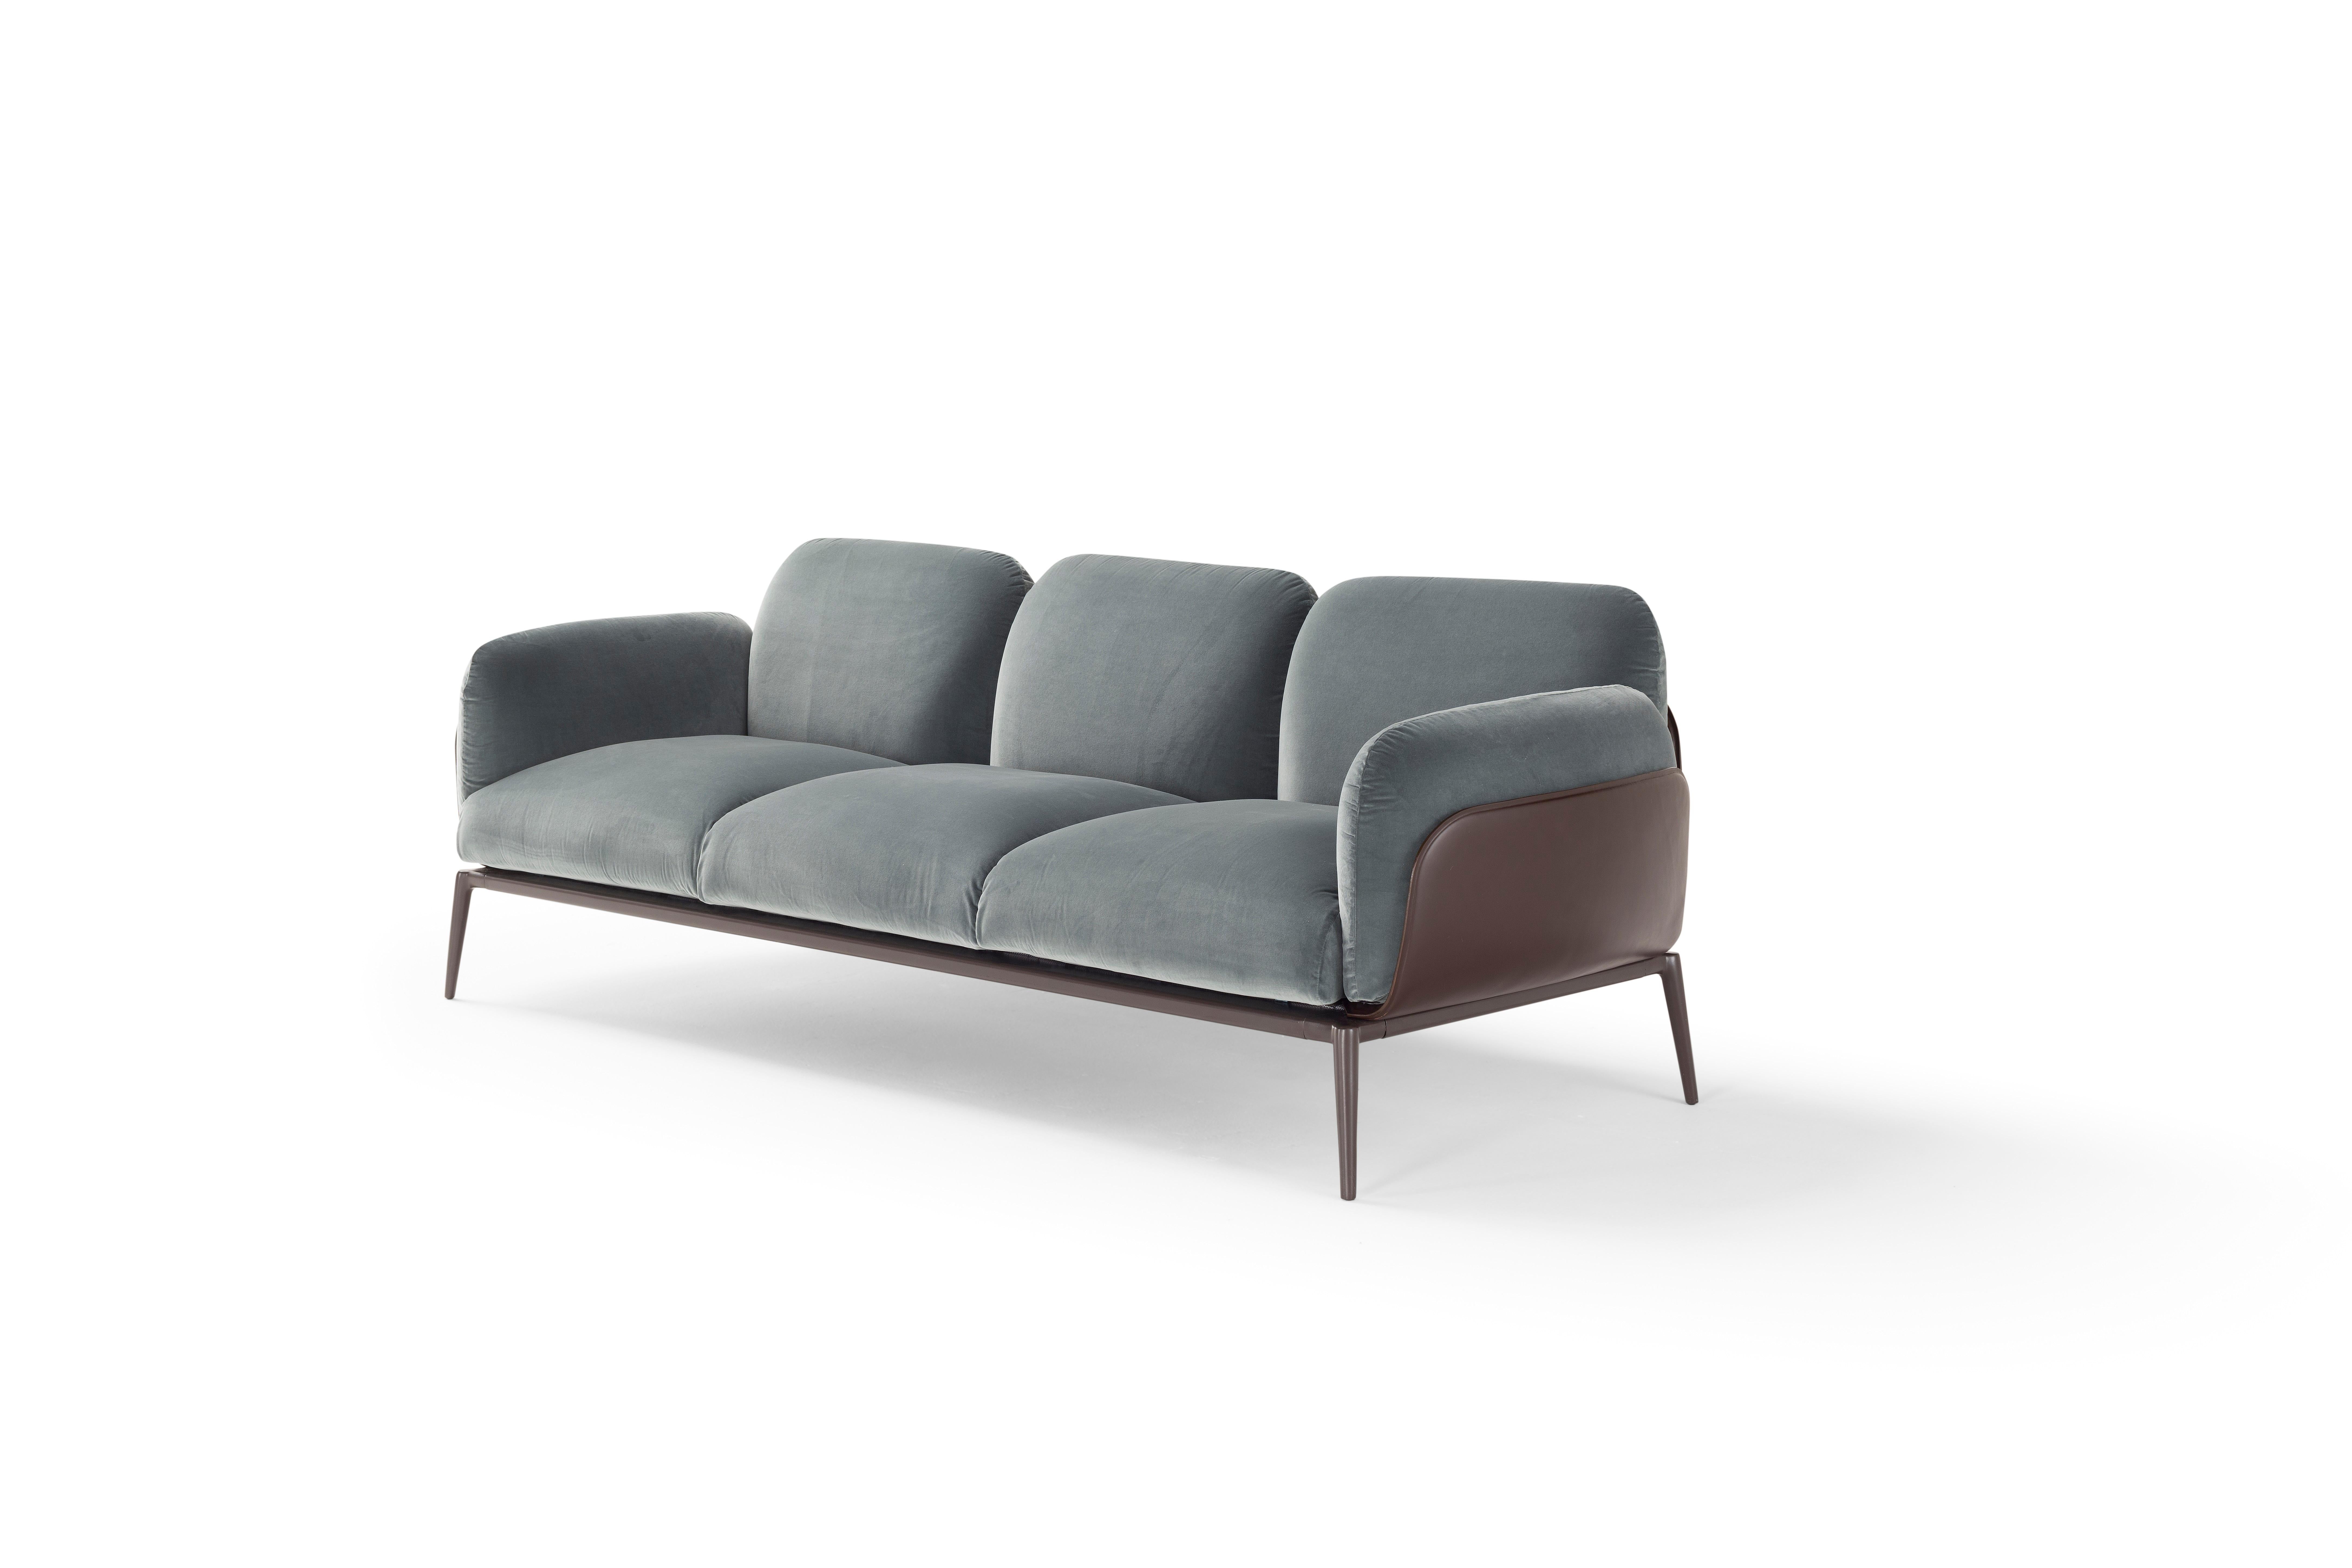 The Brooklyn sofa takes its inspiration from the New York neighbourhood of Brooklyn: a hotspot of trends springing from diverse styles. With its strong personality, the Brooklyn sofa is born from the intersection of extremely innovative materials in